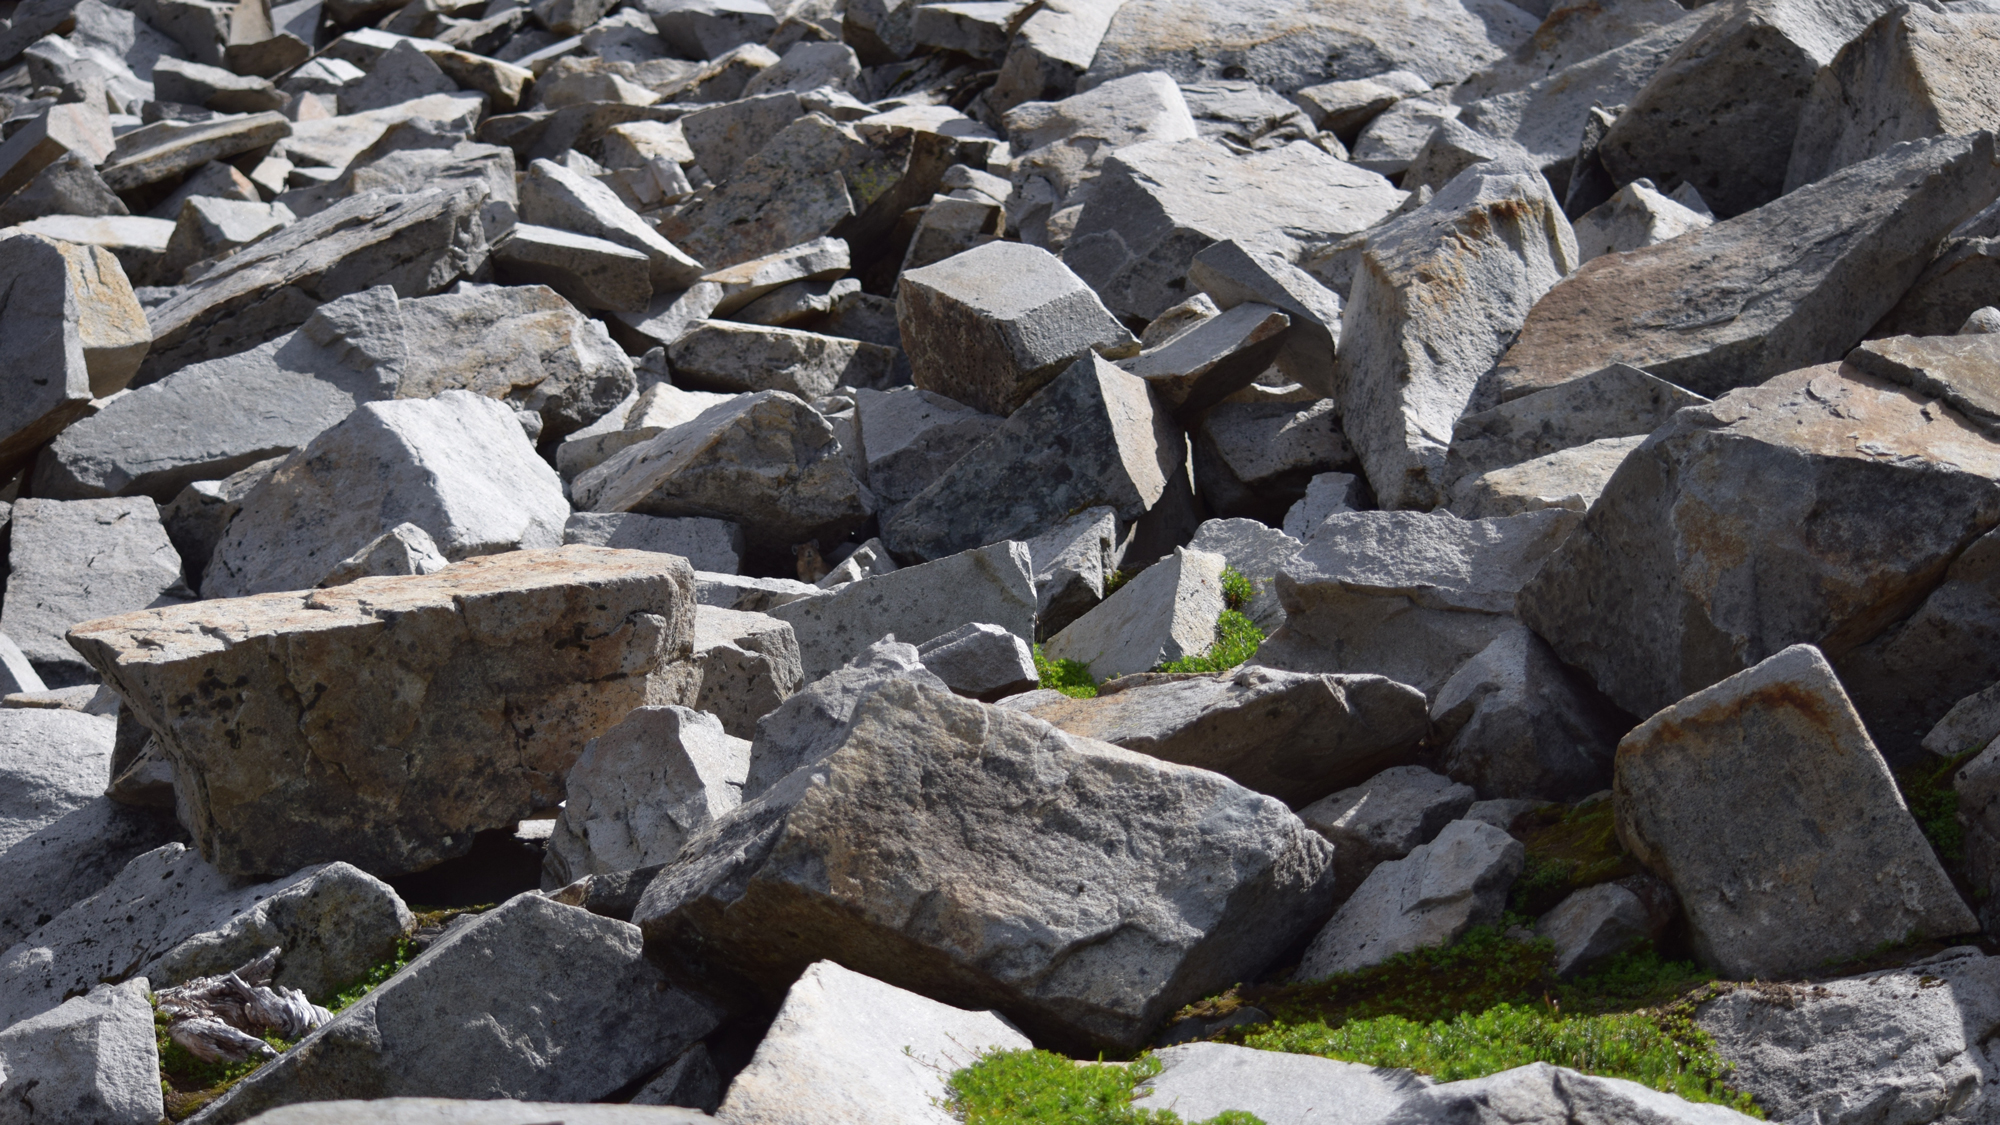 This is the habitat you're looking for. Can you spot the pika? Photo © The Nature Conservancy (Lisa Feldkamp)